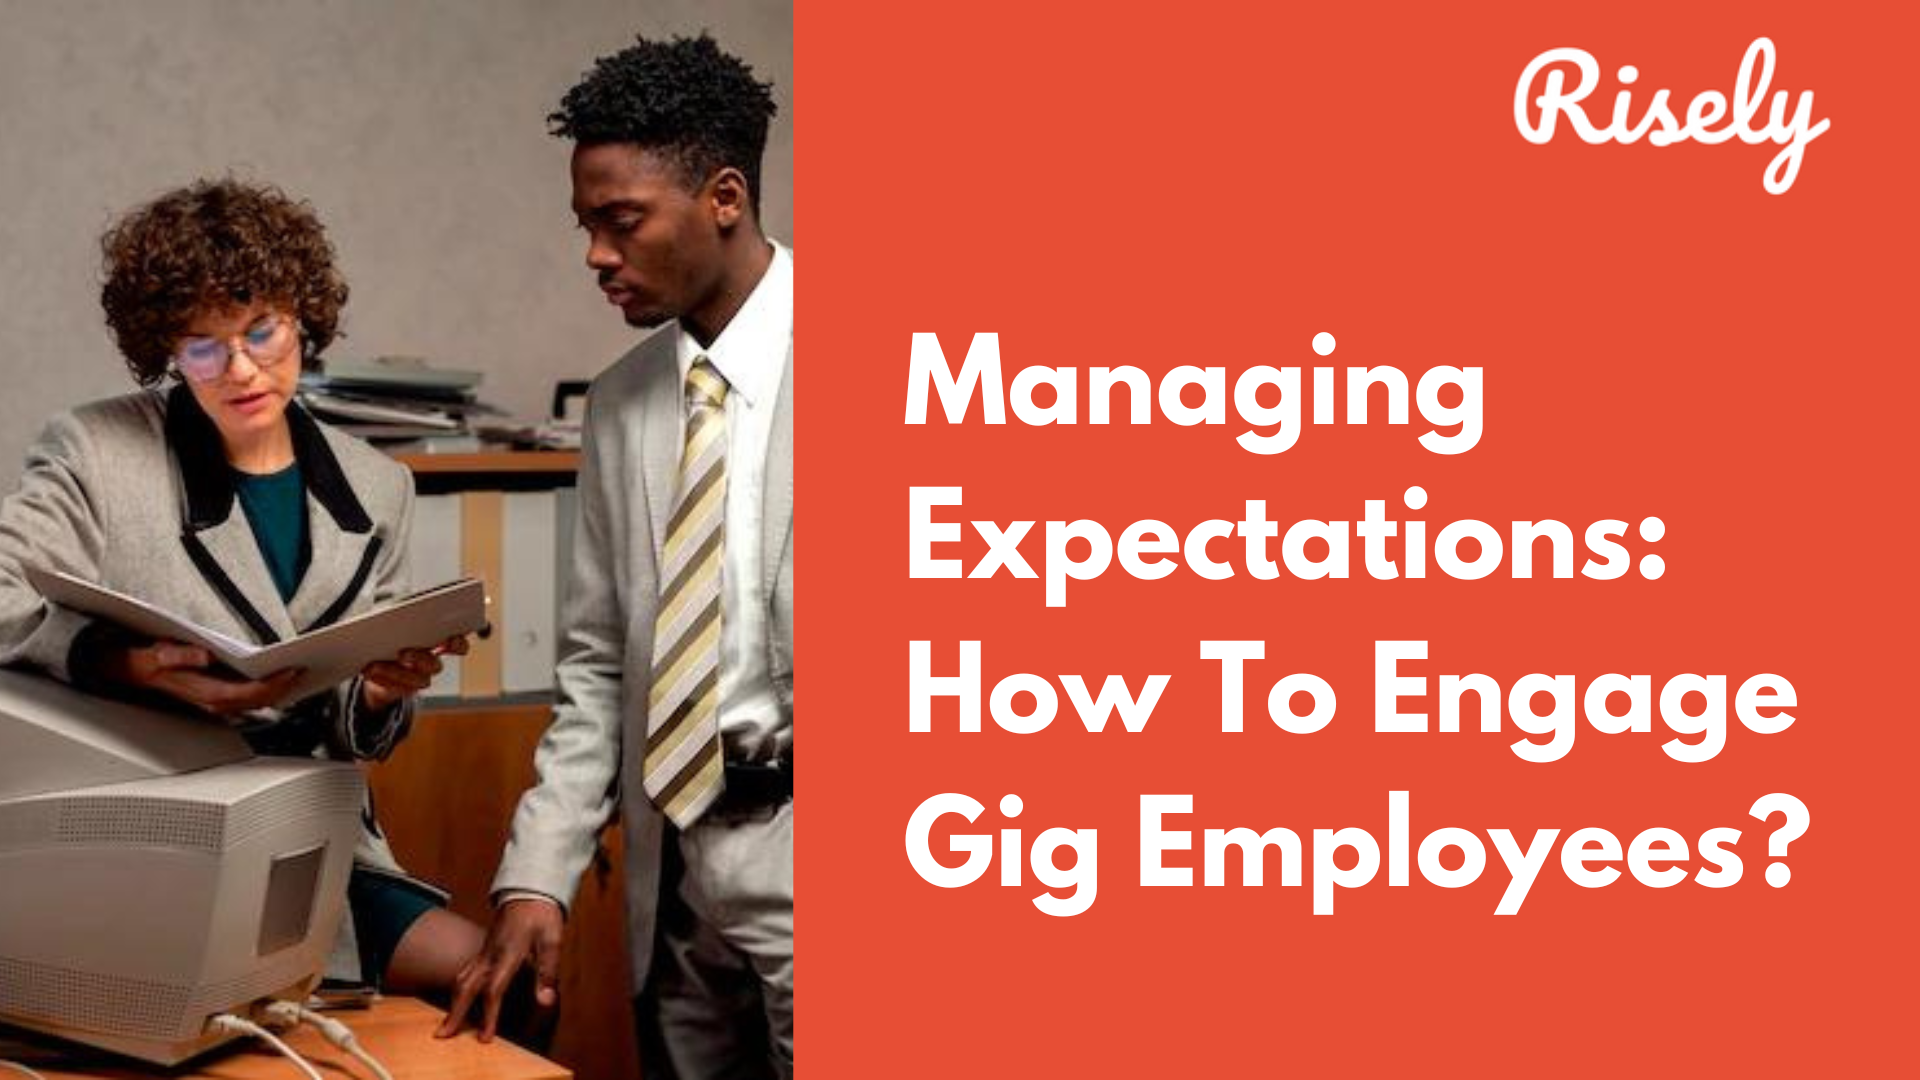 Managing Expectations: How To Engage Gig Employees?